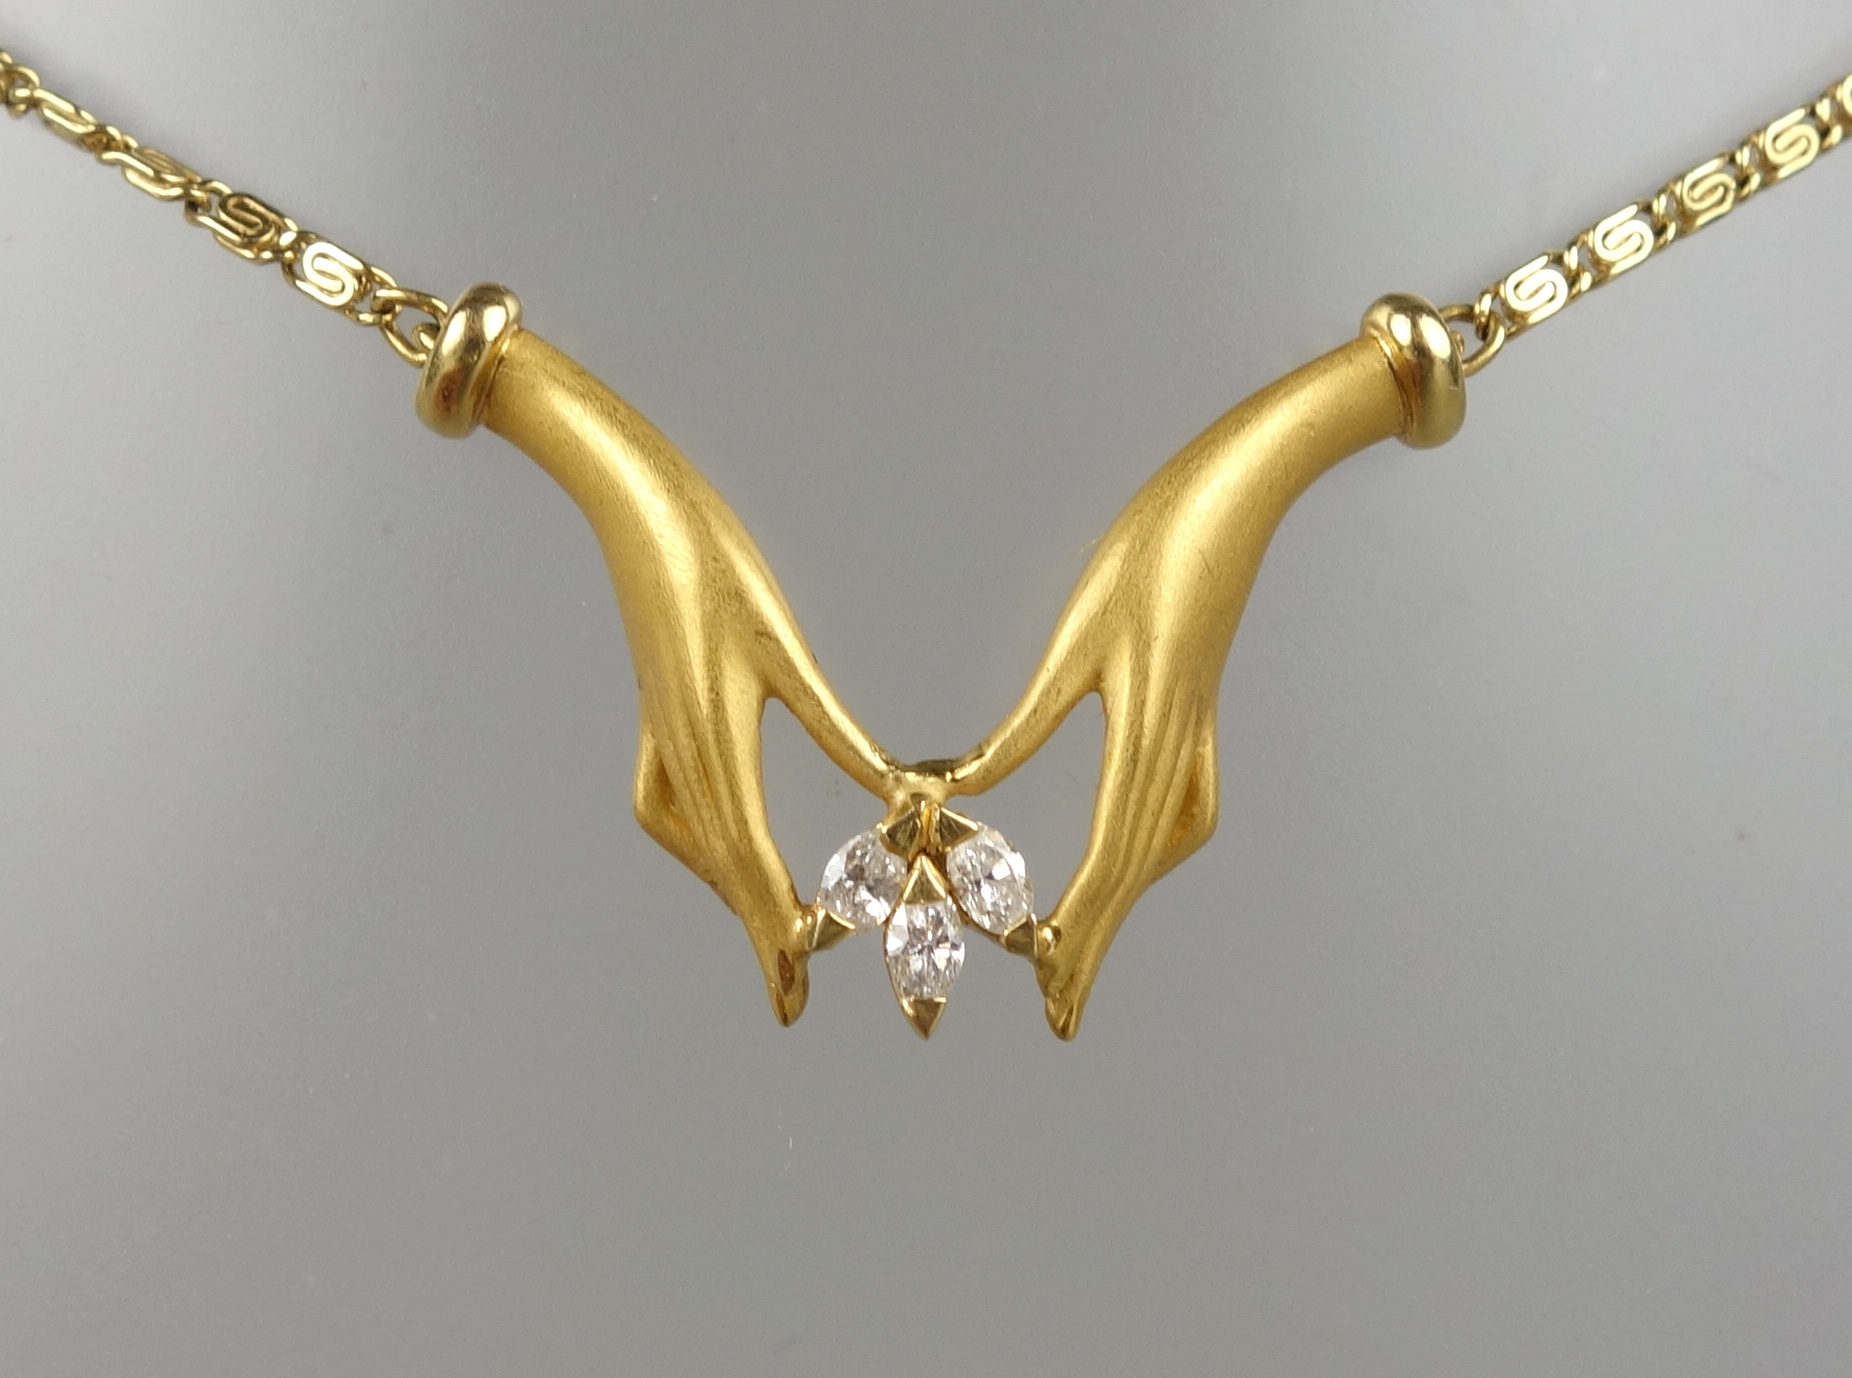 Necklace "Hands", CARRERA Y CARRERA, with 3 navettes diamonds, 18K gold